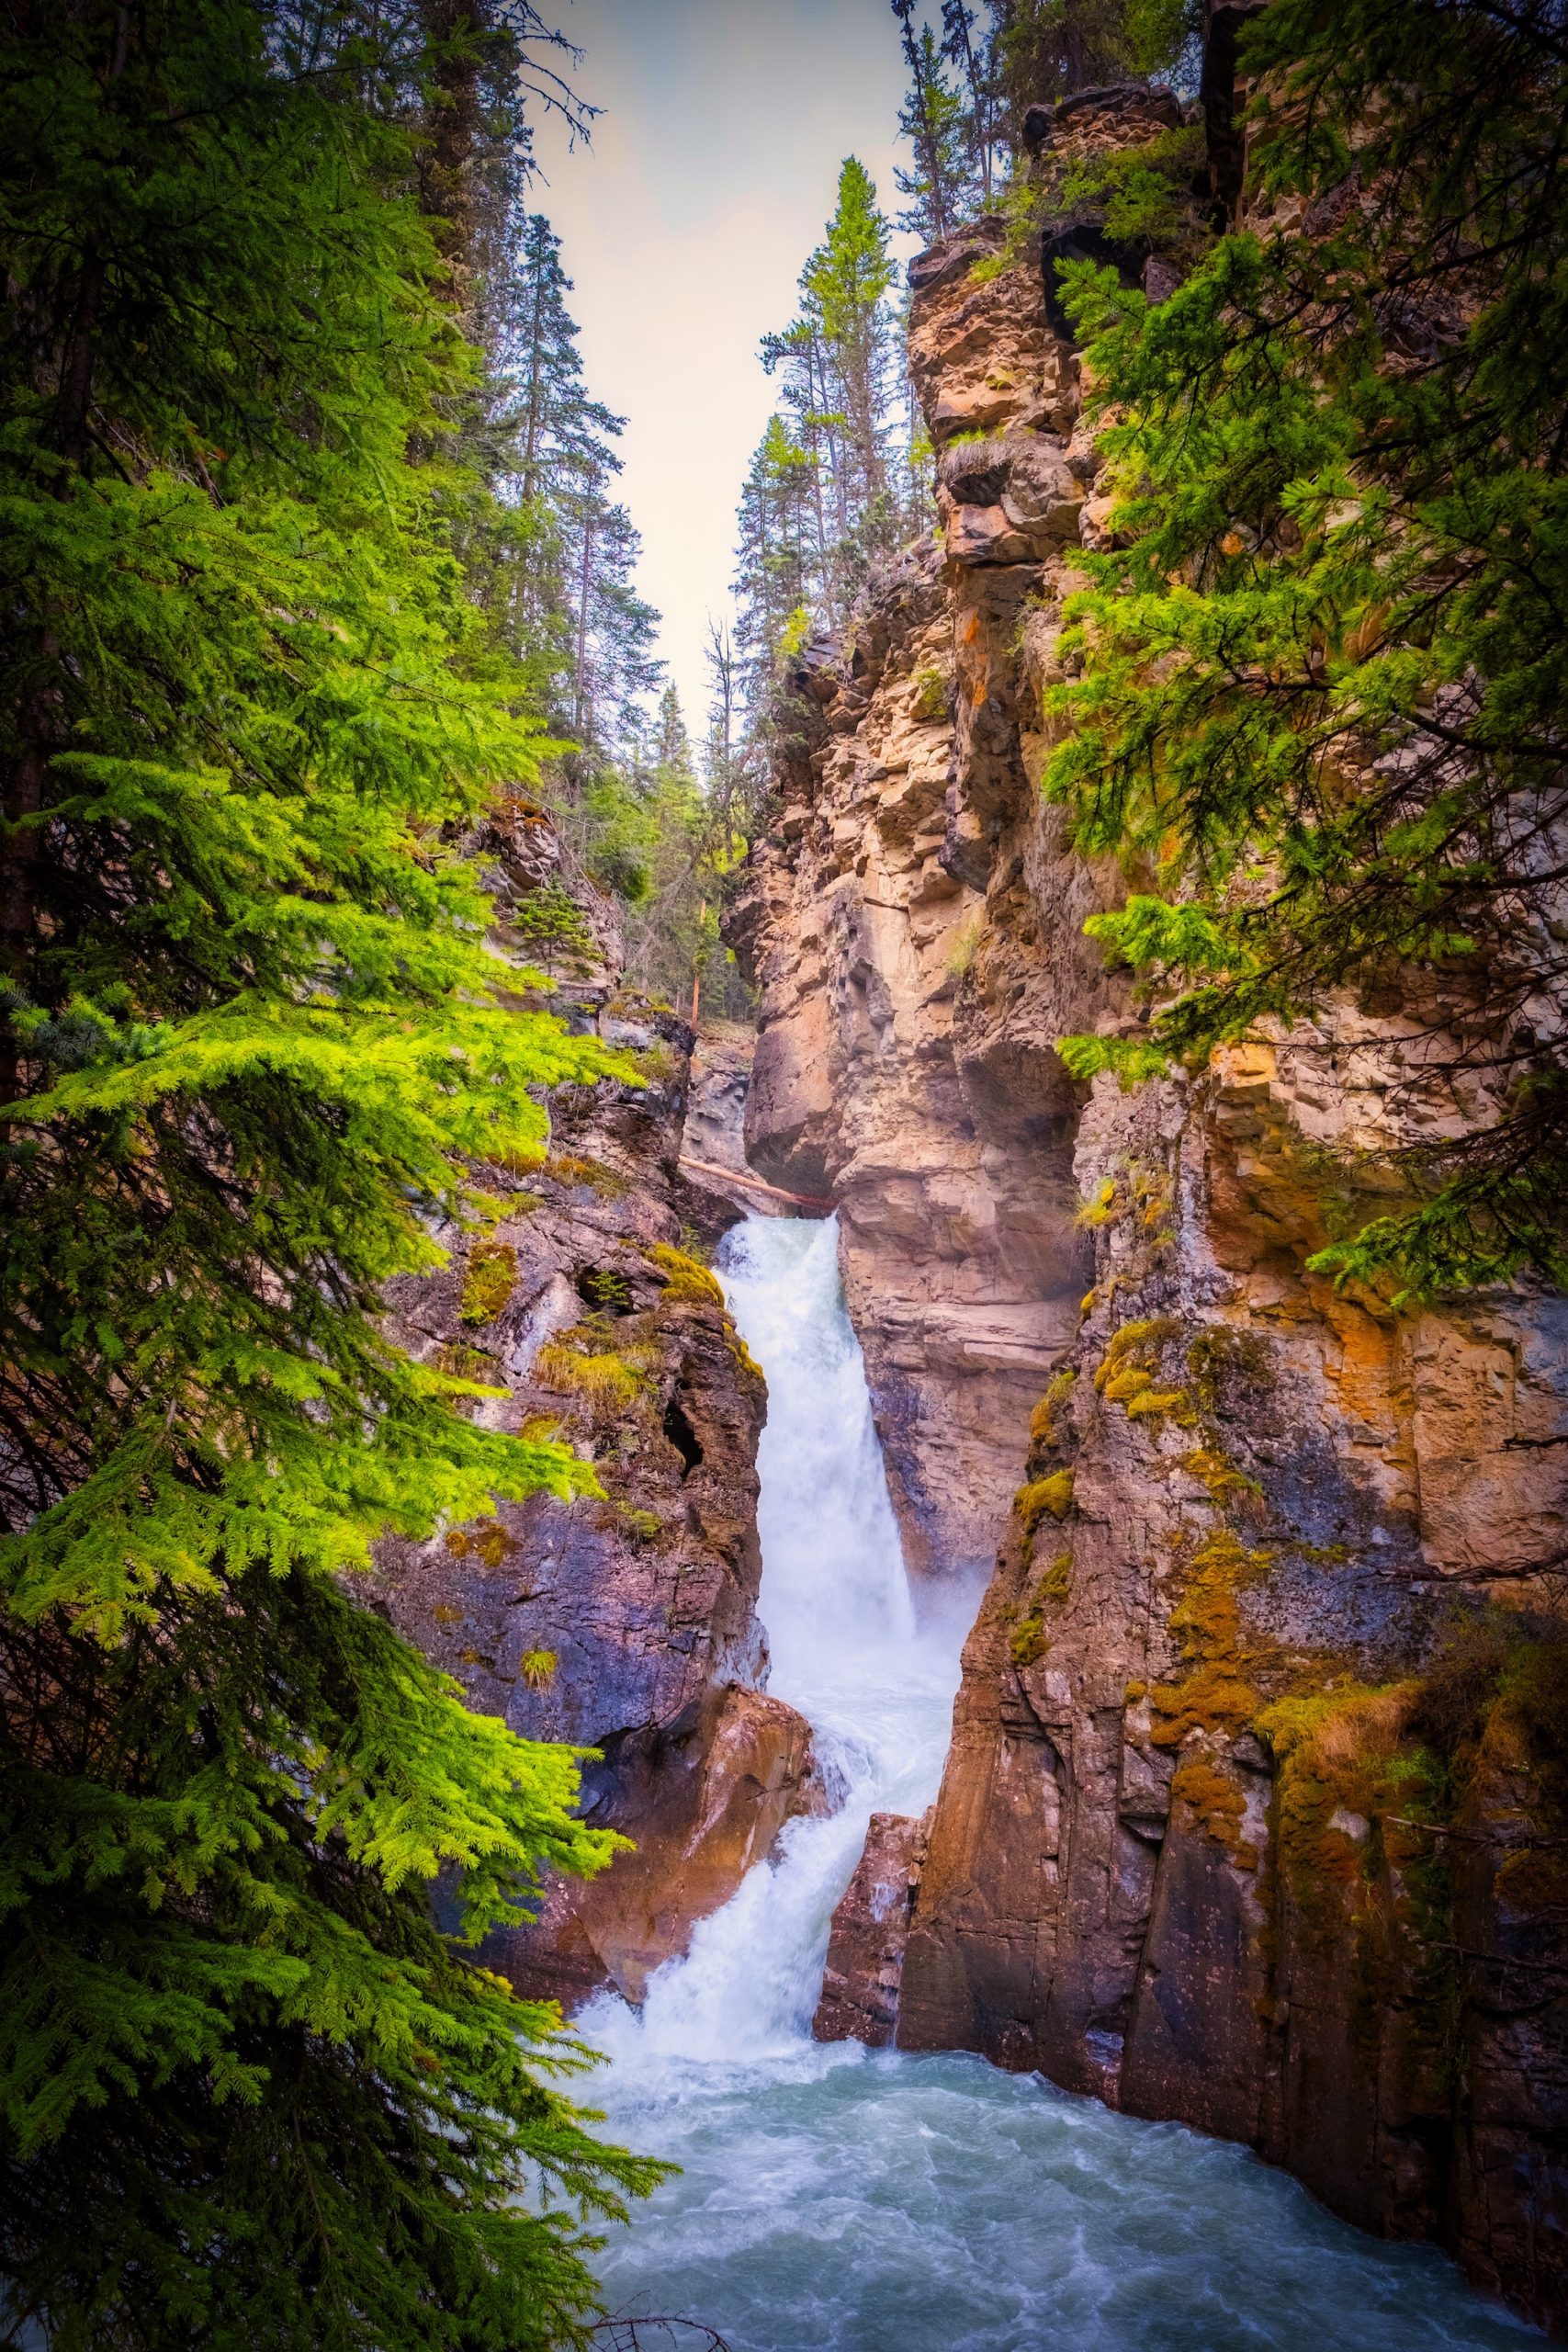 The lower falls in Johnston Canyon